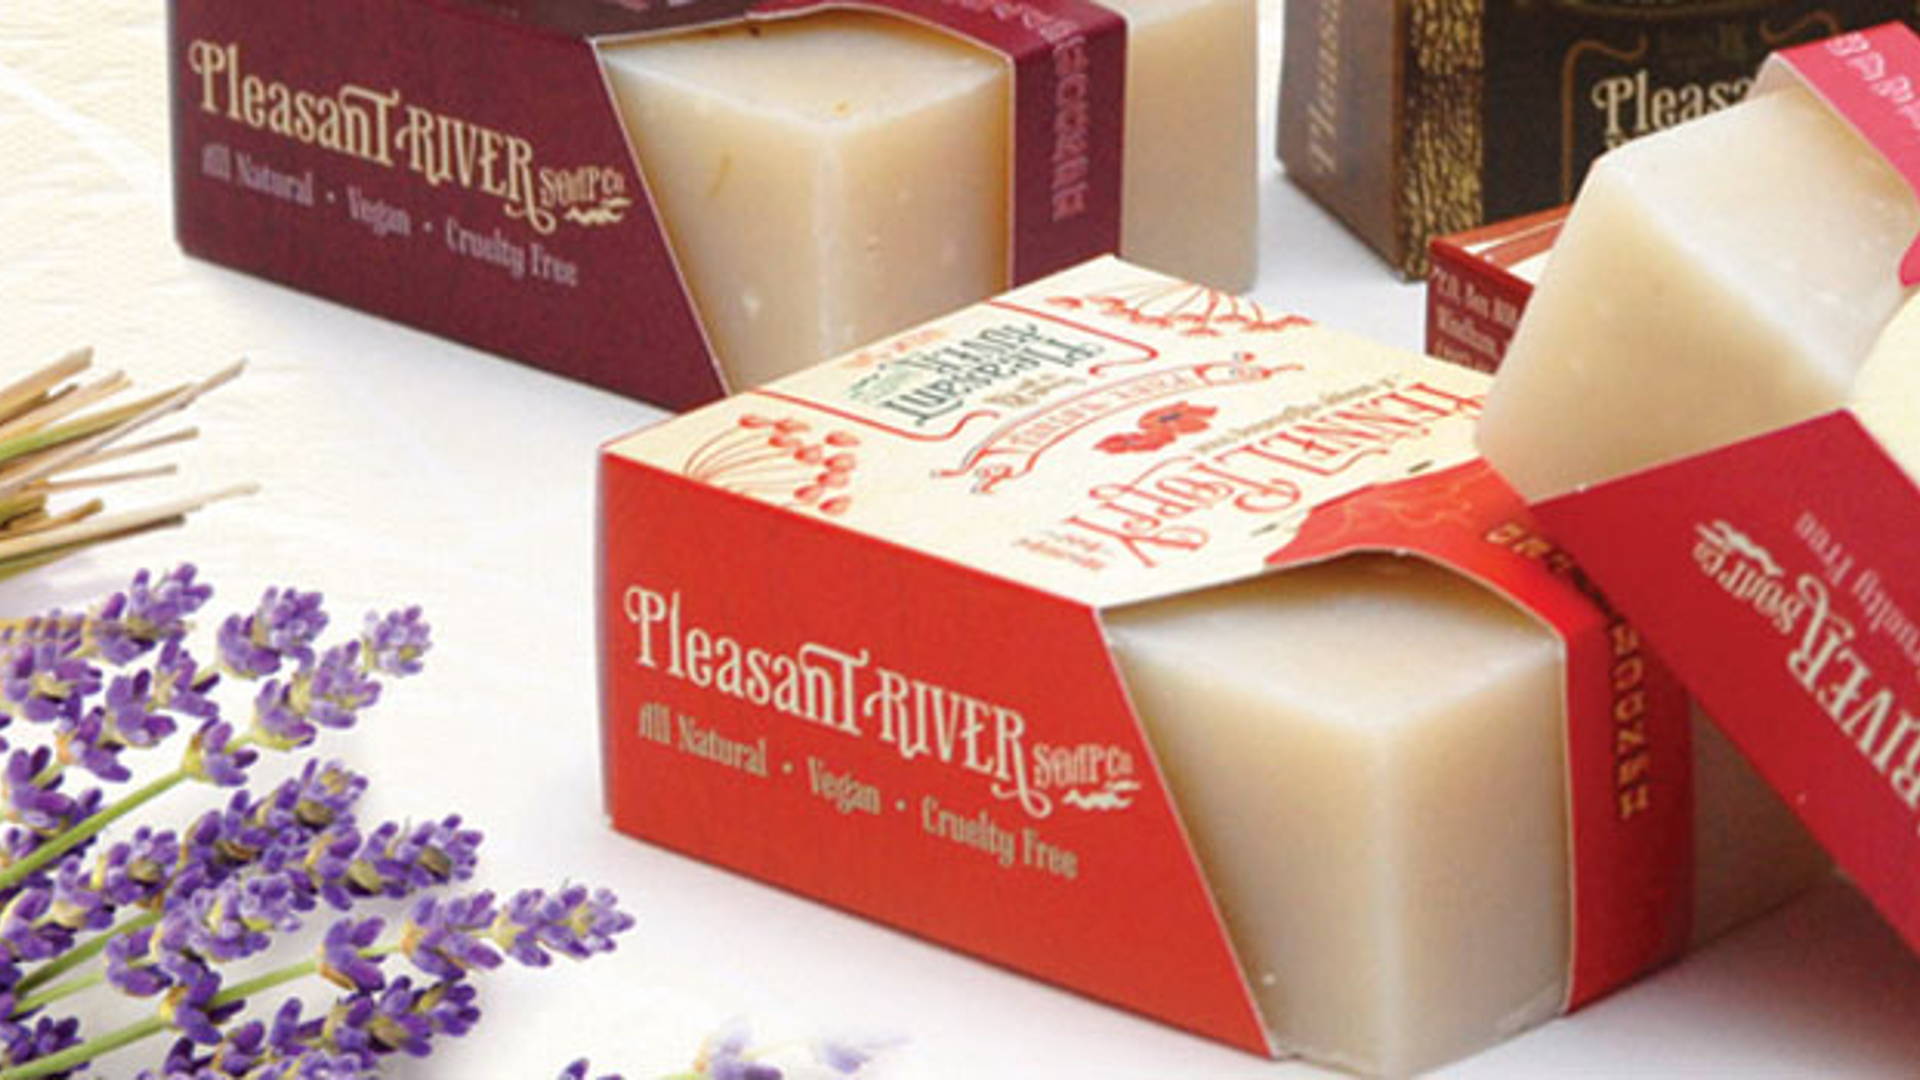 Featured image for Pleasant River Soap